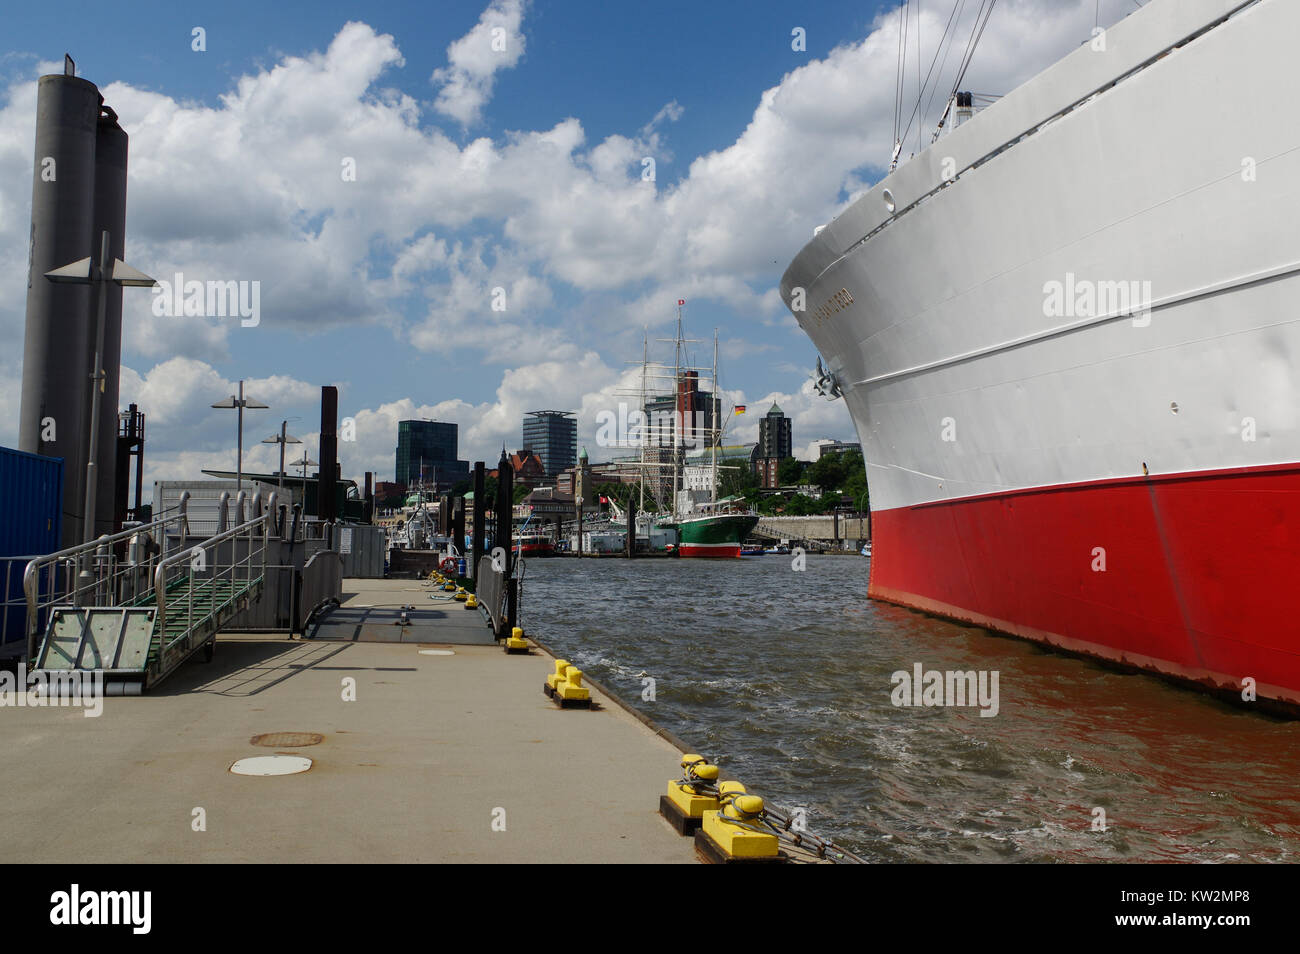 HAMBURG, GERMANY - JULY 18, 2015: MS Cap San Diego is a general cargo ship, situated as a museum ship in Hamburg - St Pauli, Germany. Stock Photo